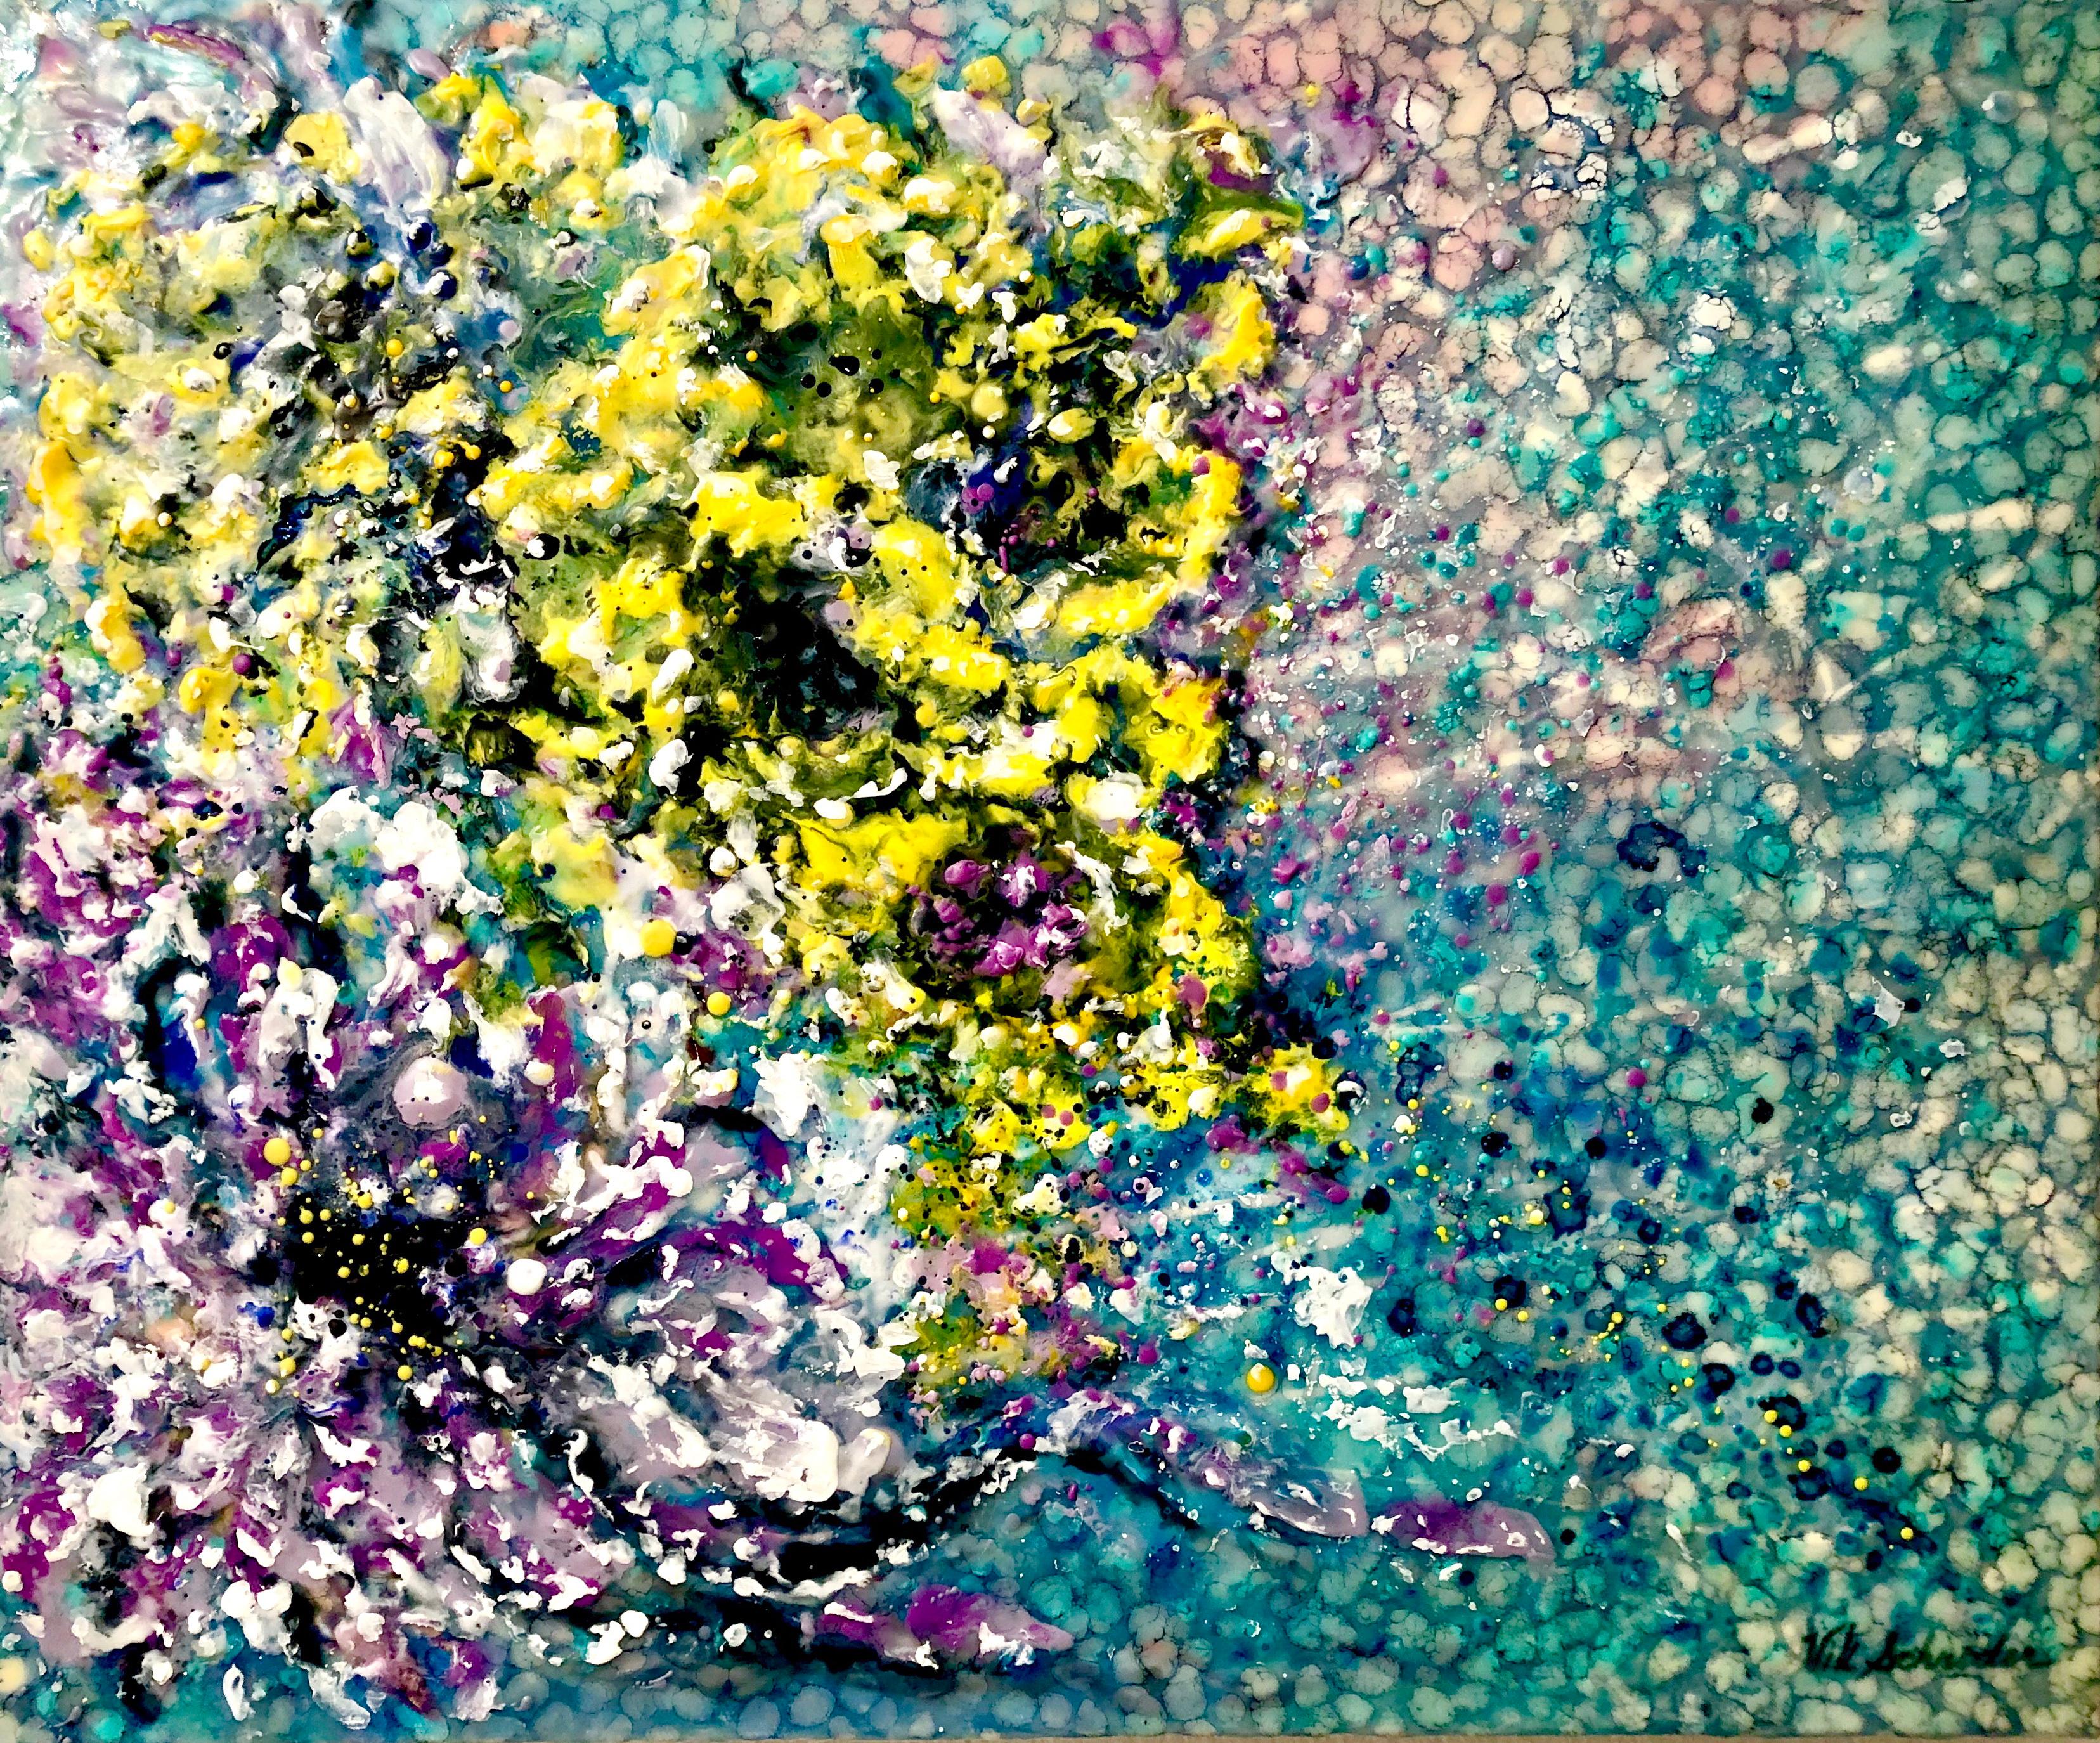 Vik Schroeder  Interior Painting - Water Flowers. Encaustic (hot wax) Impressionism. Sea / Flora / Abstract 